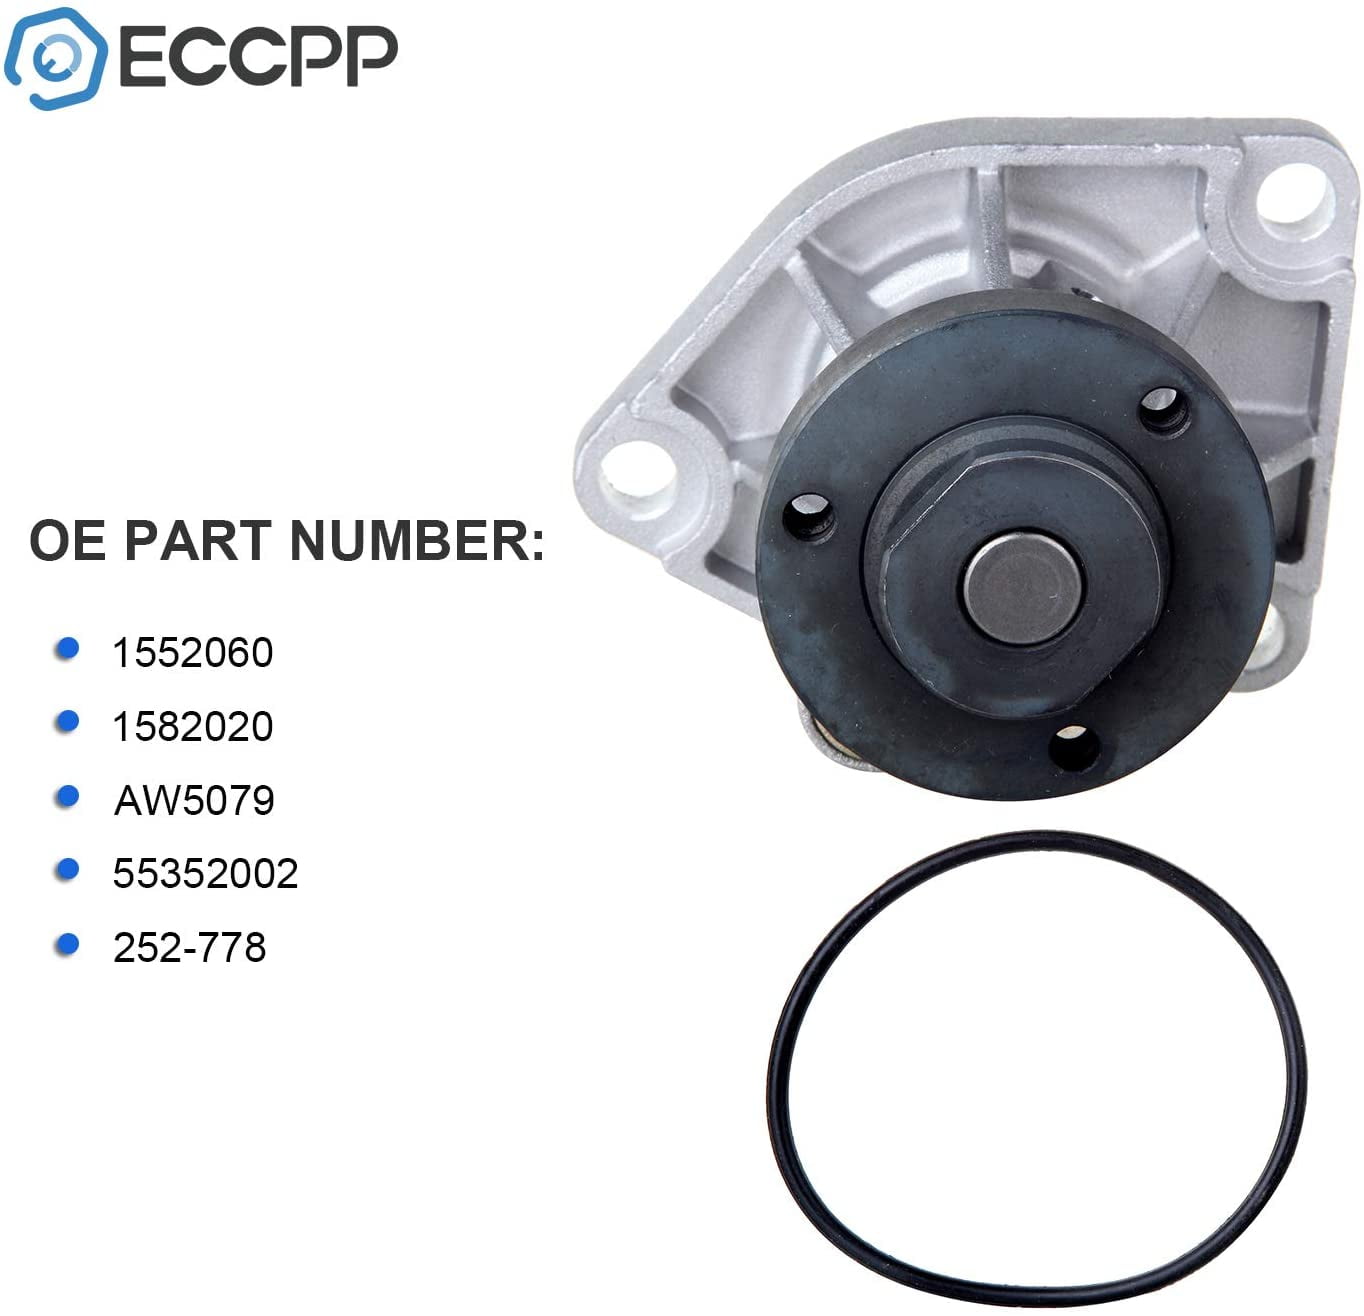 ECCPP AW5079 Gaskets Water Pump Fits for Cadillac Catera 1997 1998 1999 2000 Saab 900 1997 1996 Saturn LW2 2000 Saturn LW300 2003 2002 2001 